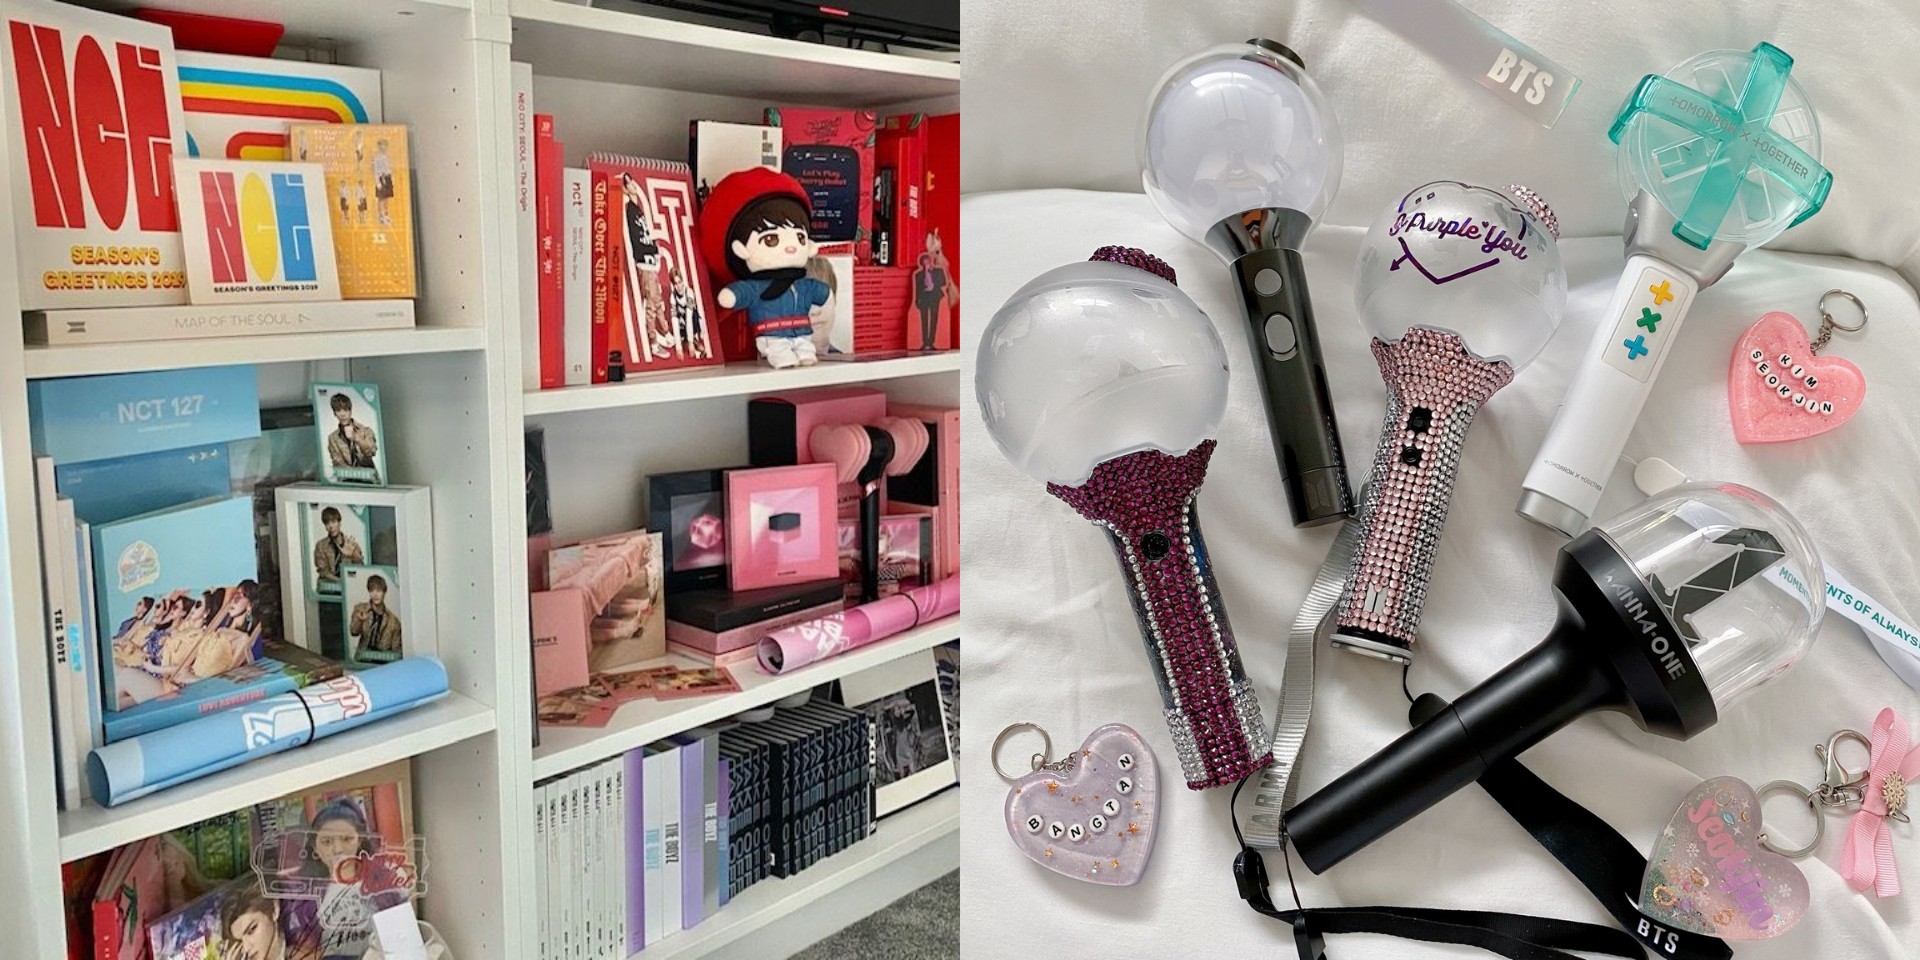 Useful BTS Merch and Other Cool K-Pop Finds to Buy in the PH